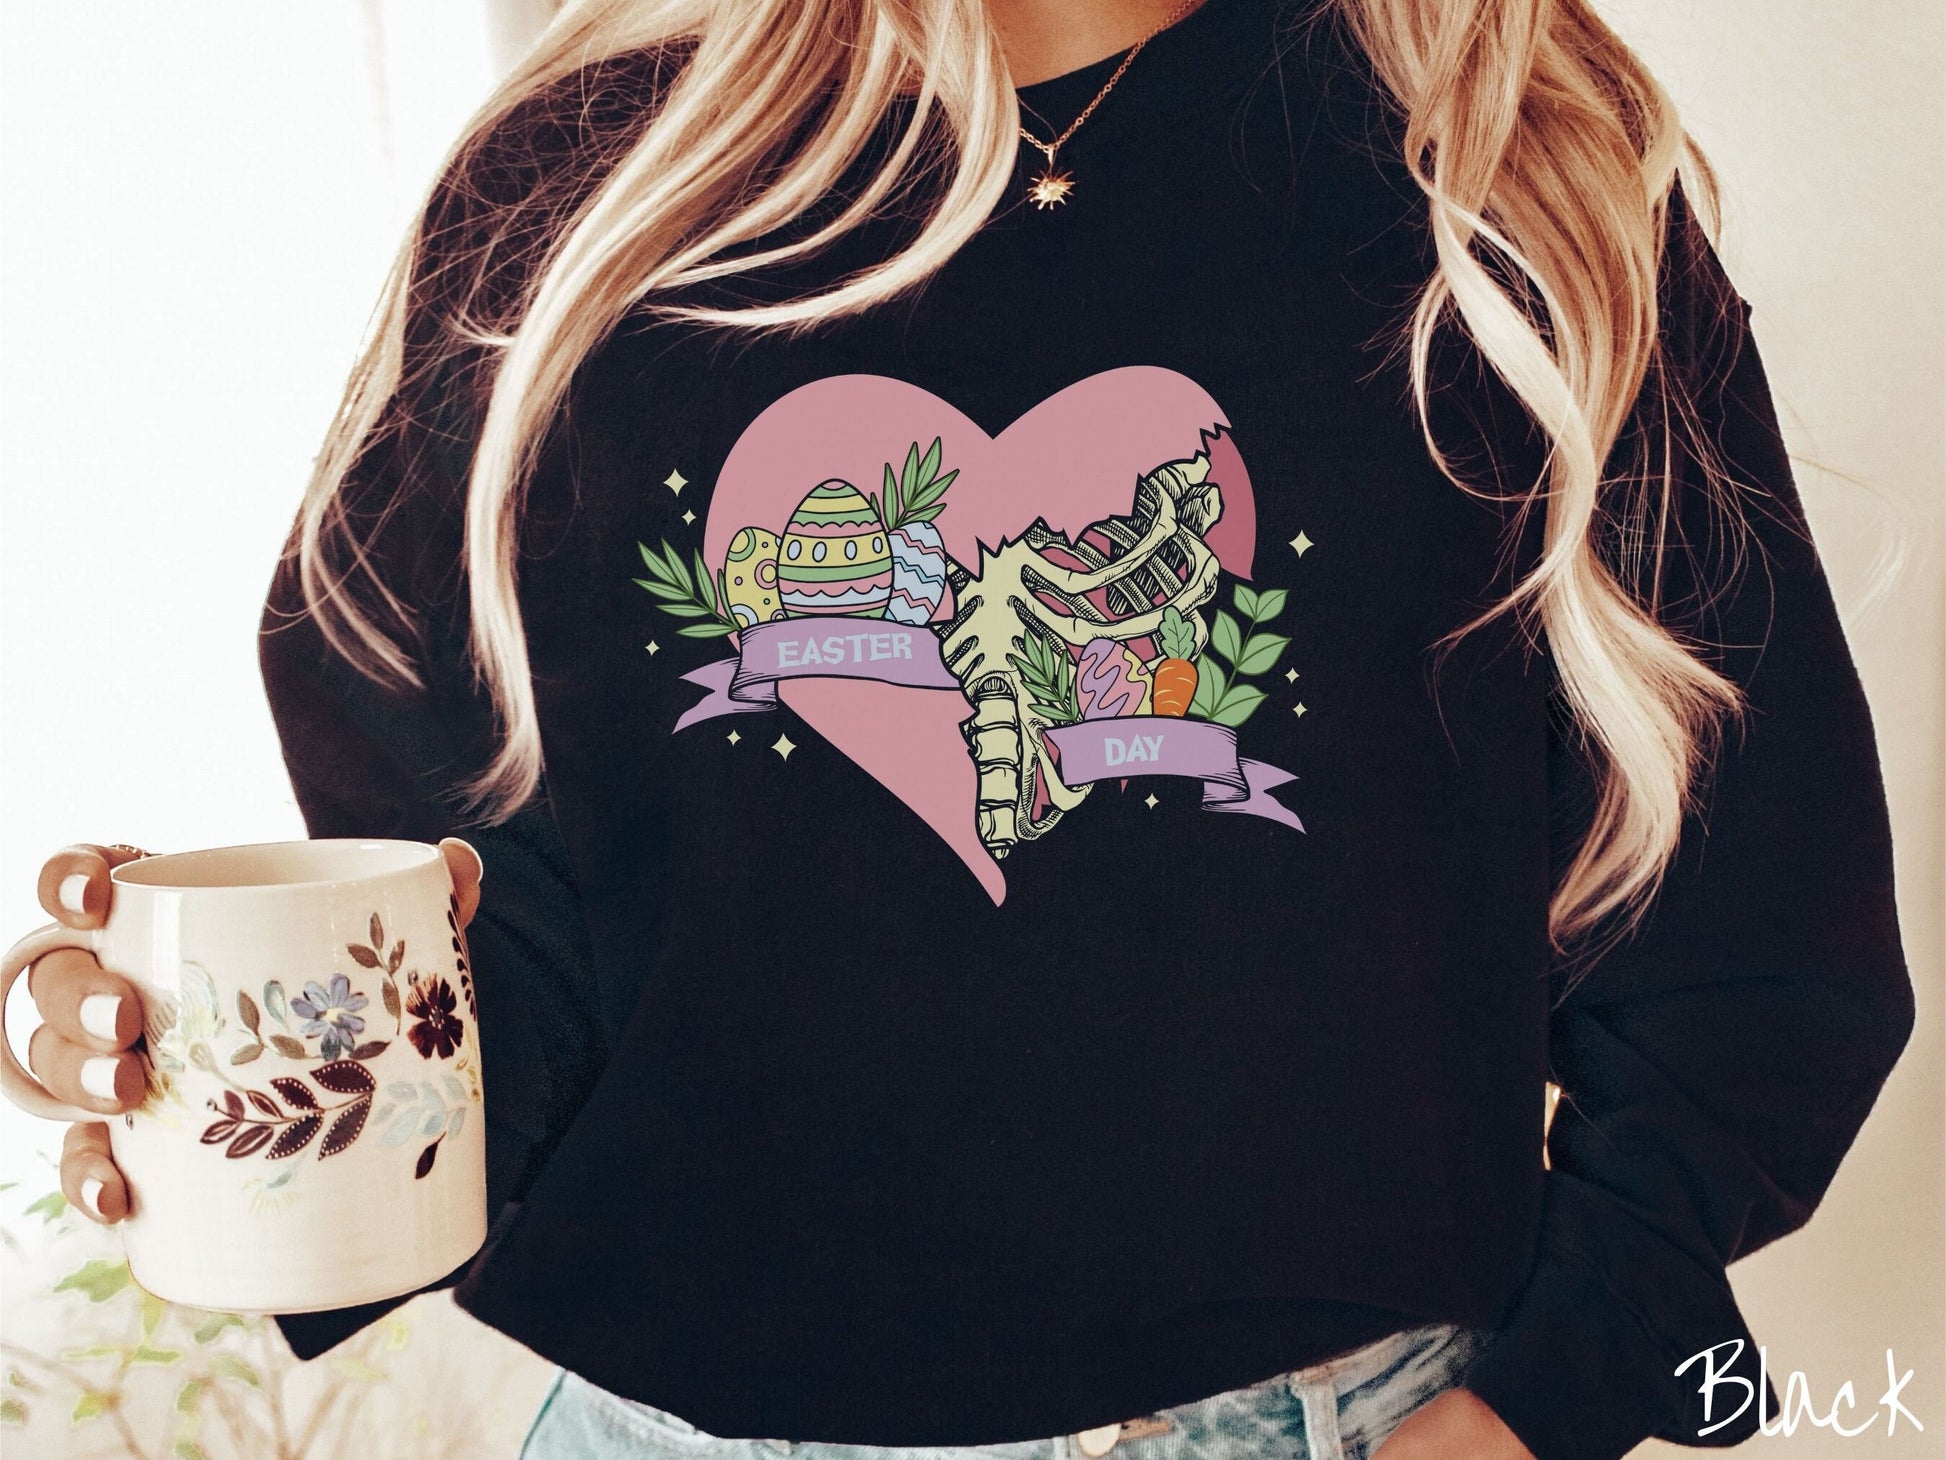 A woman wearing a cute, vintage black colored sweatshirt with a pink heart that is cracking and underneath is a skeleton rib cage. There is a pink banner across the heart that says Easter Day, and above that are colorful Easter eggs and leaves.